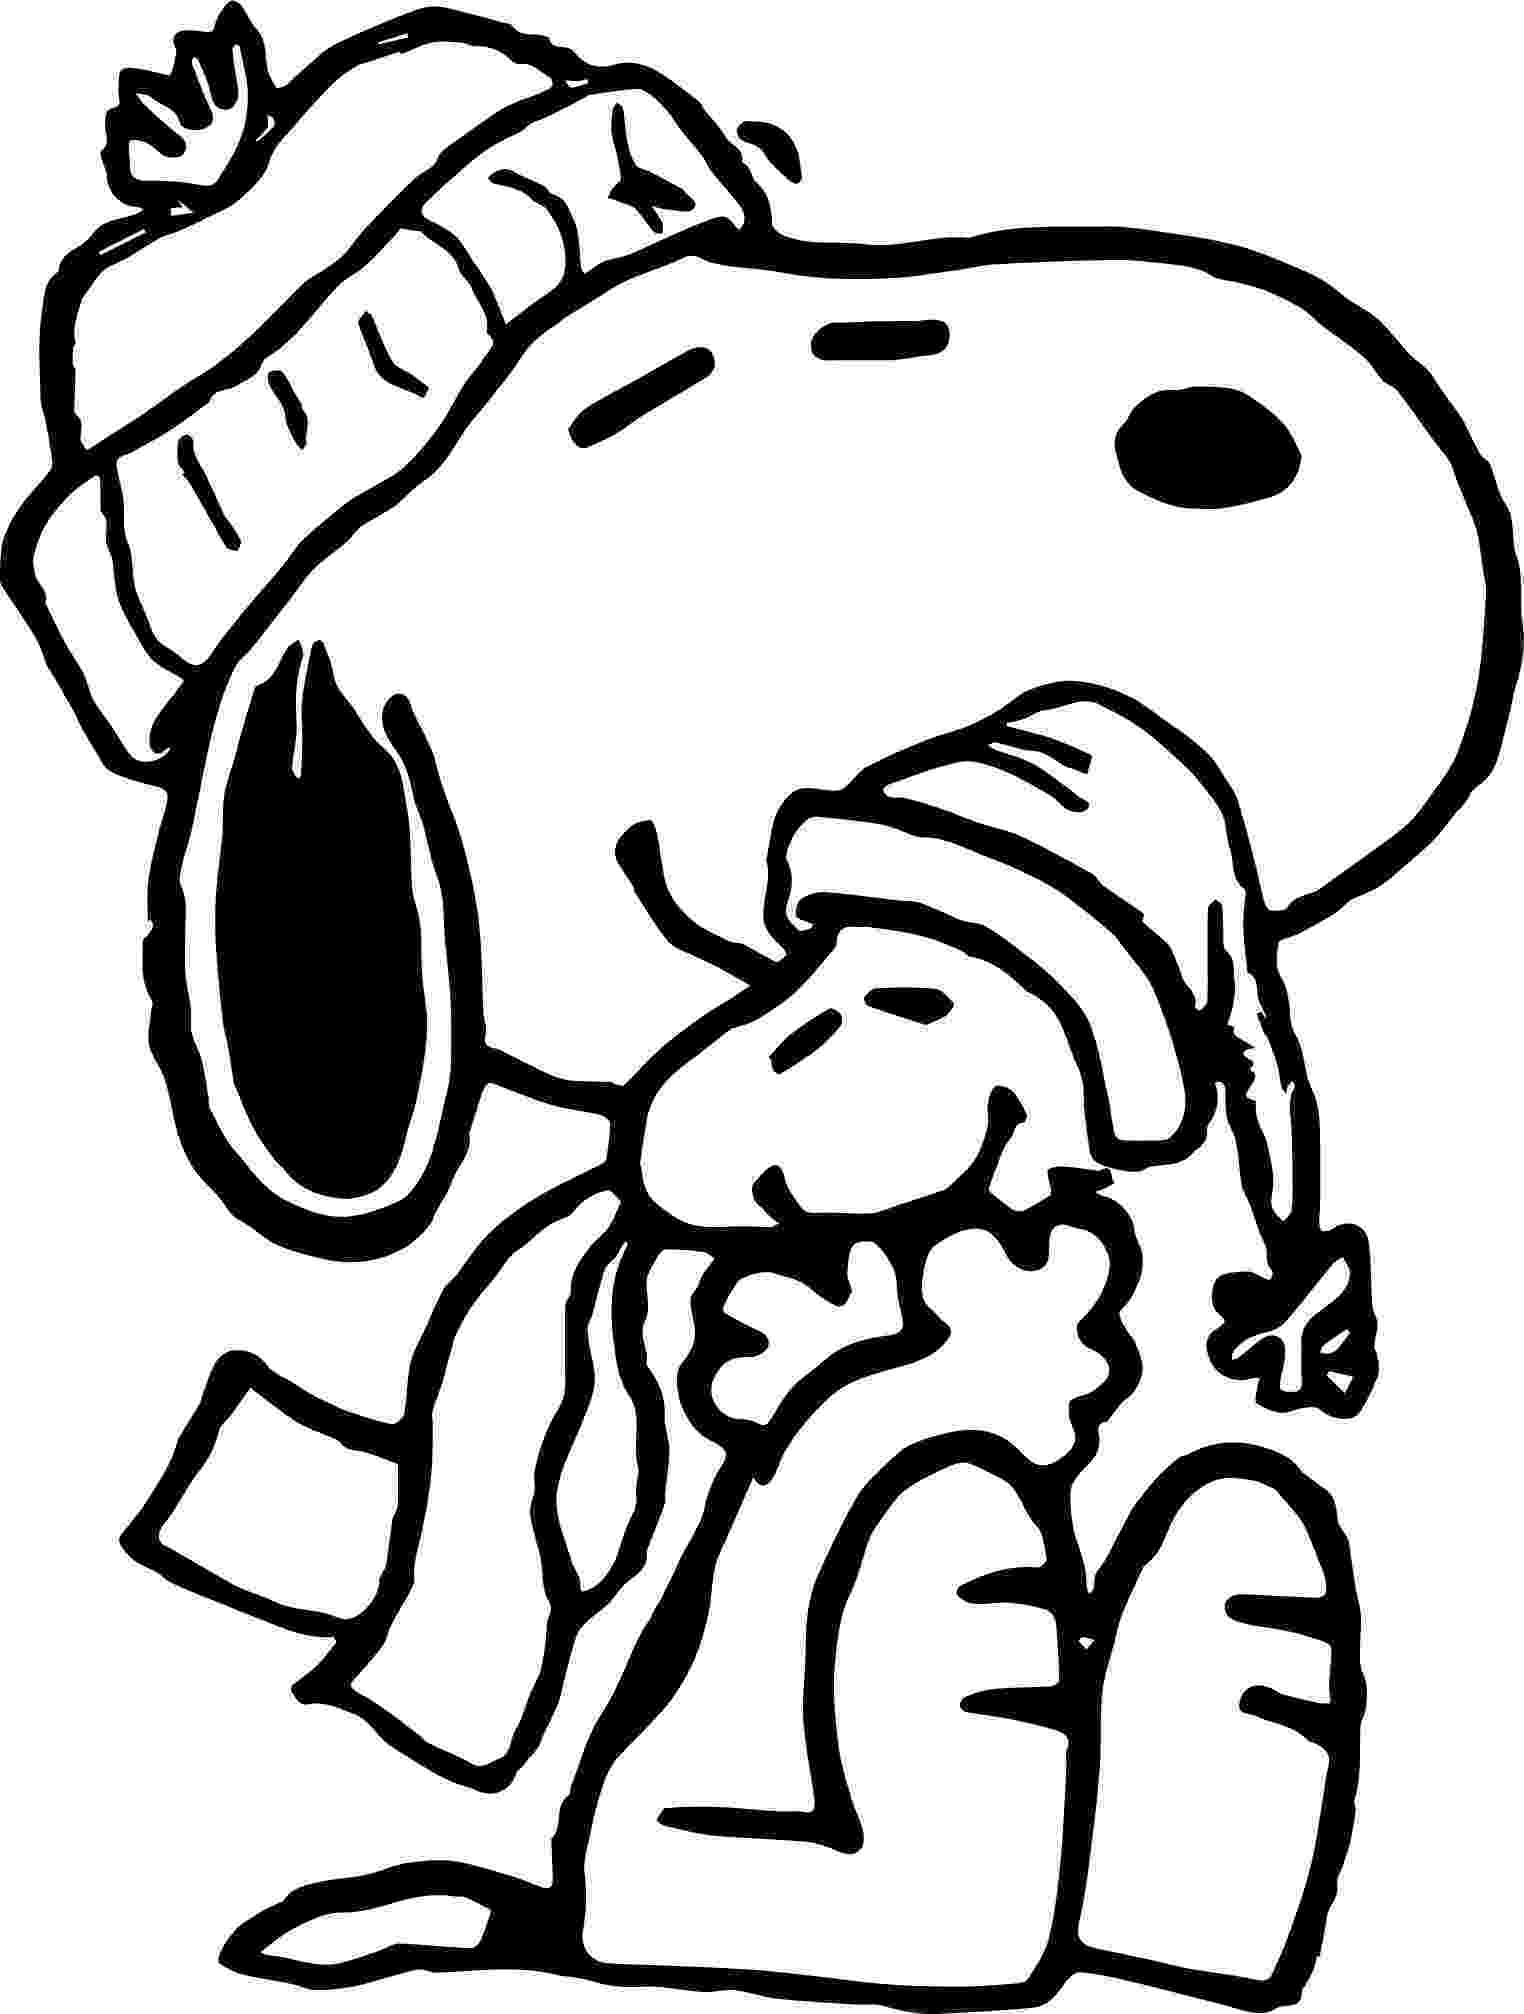 peanuts christmas coloring pages free printable charlie brown christmas coloring pages for coloring christmas peanuts pages 1 1